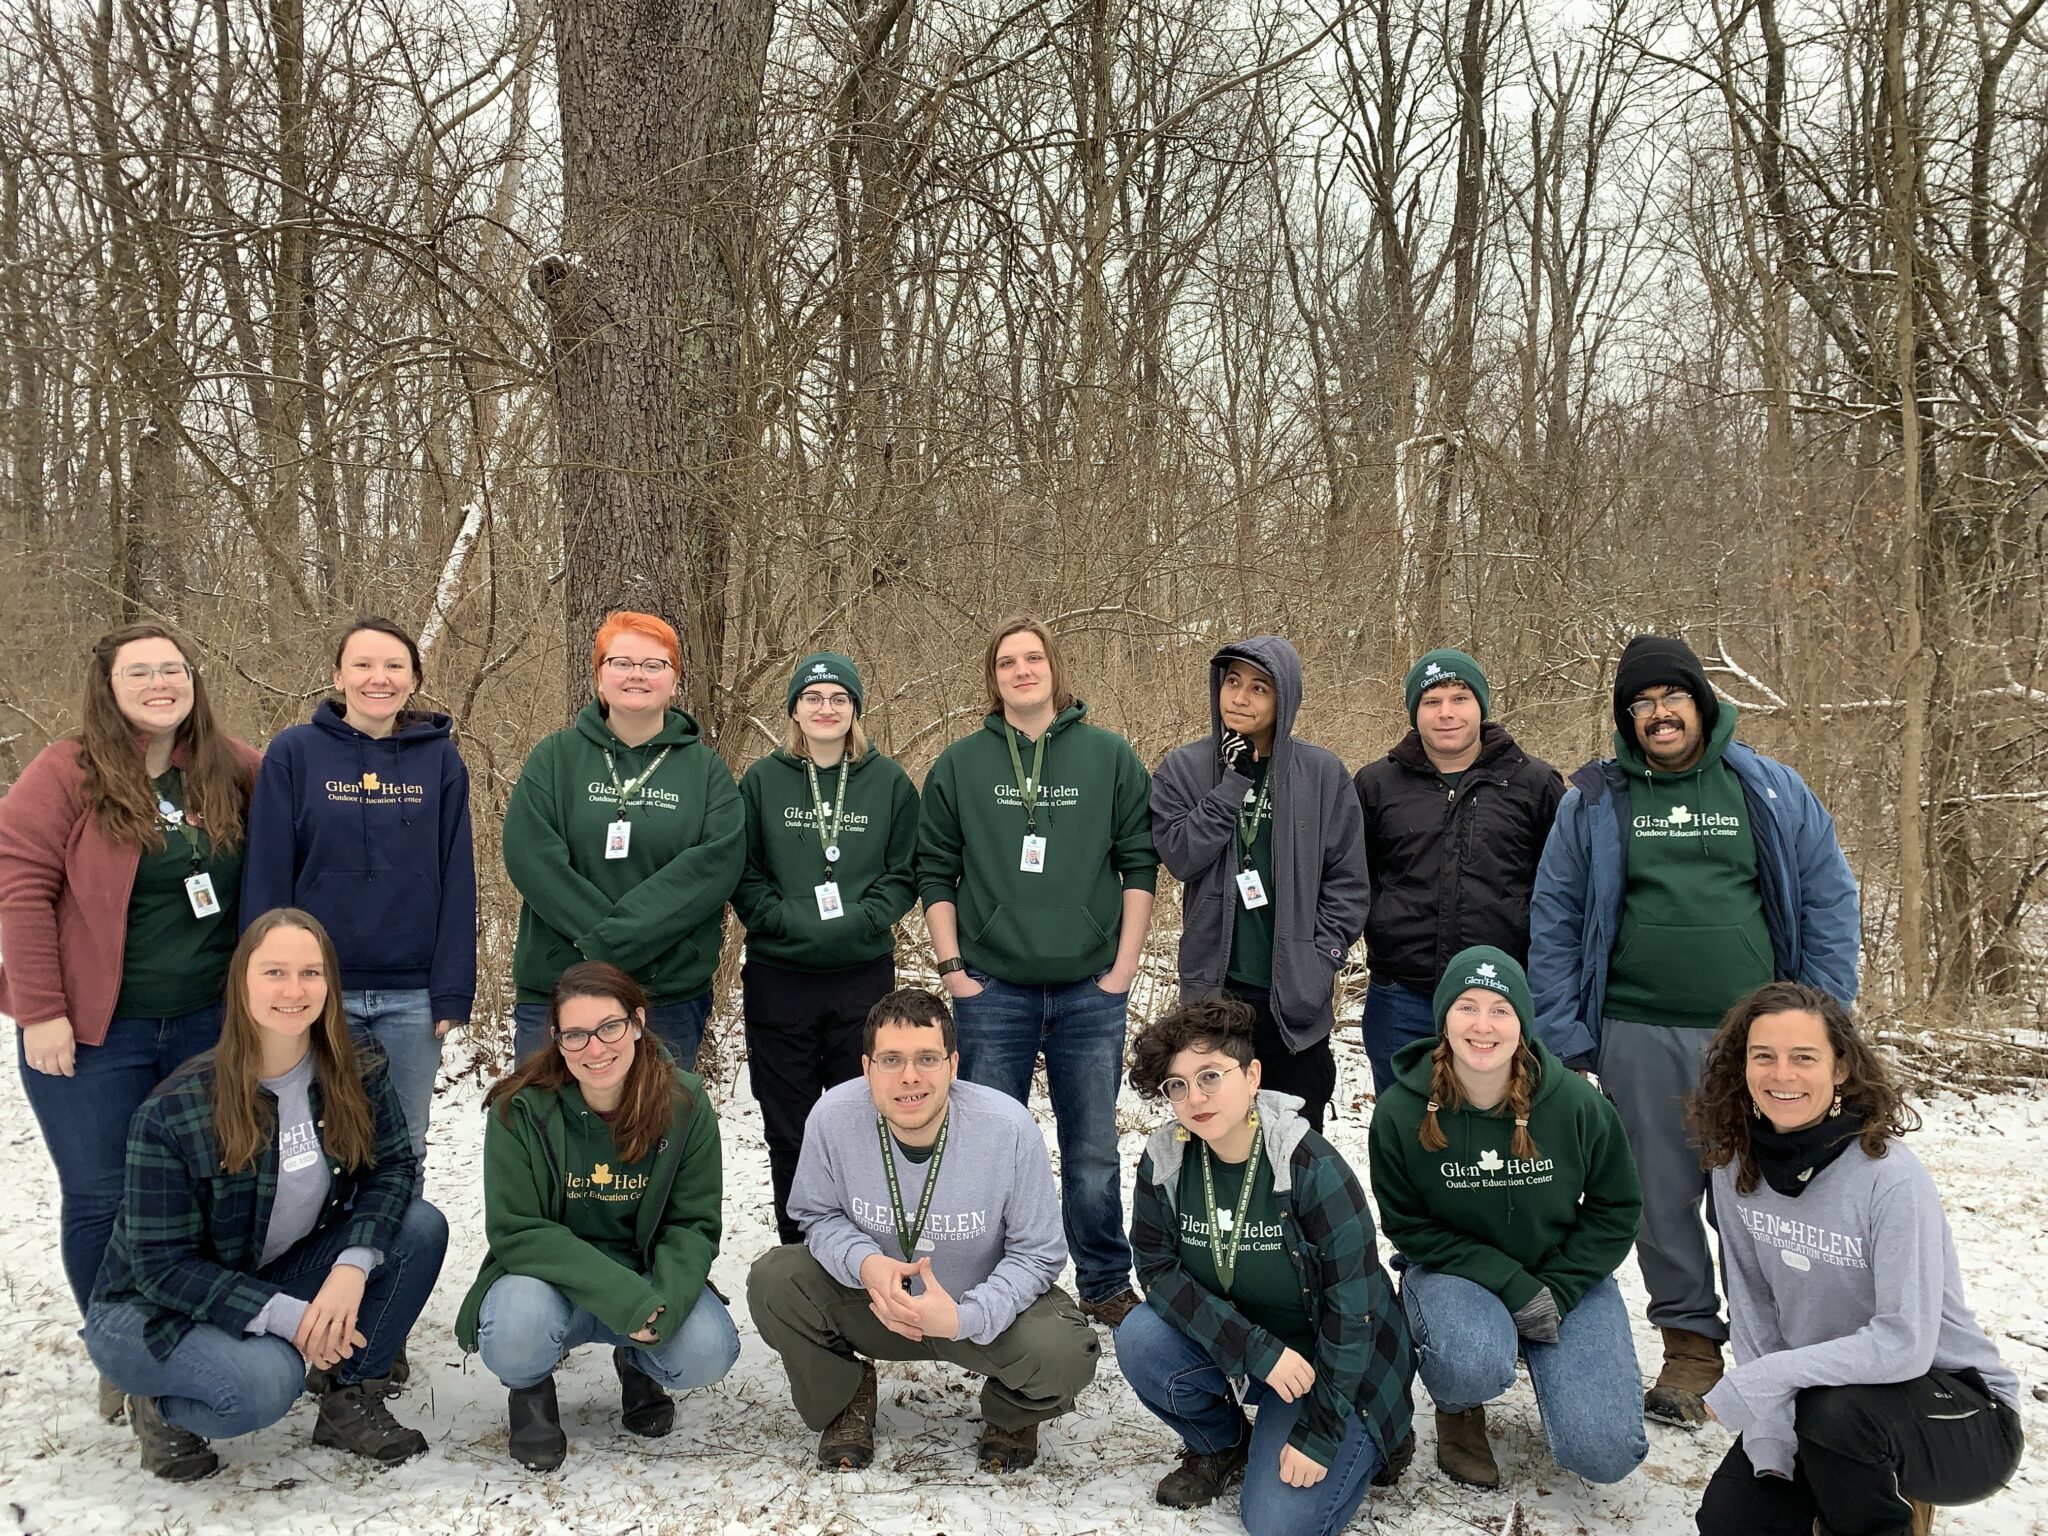 A group photo of all naturalists, including Rosabella, outside in the snow.